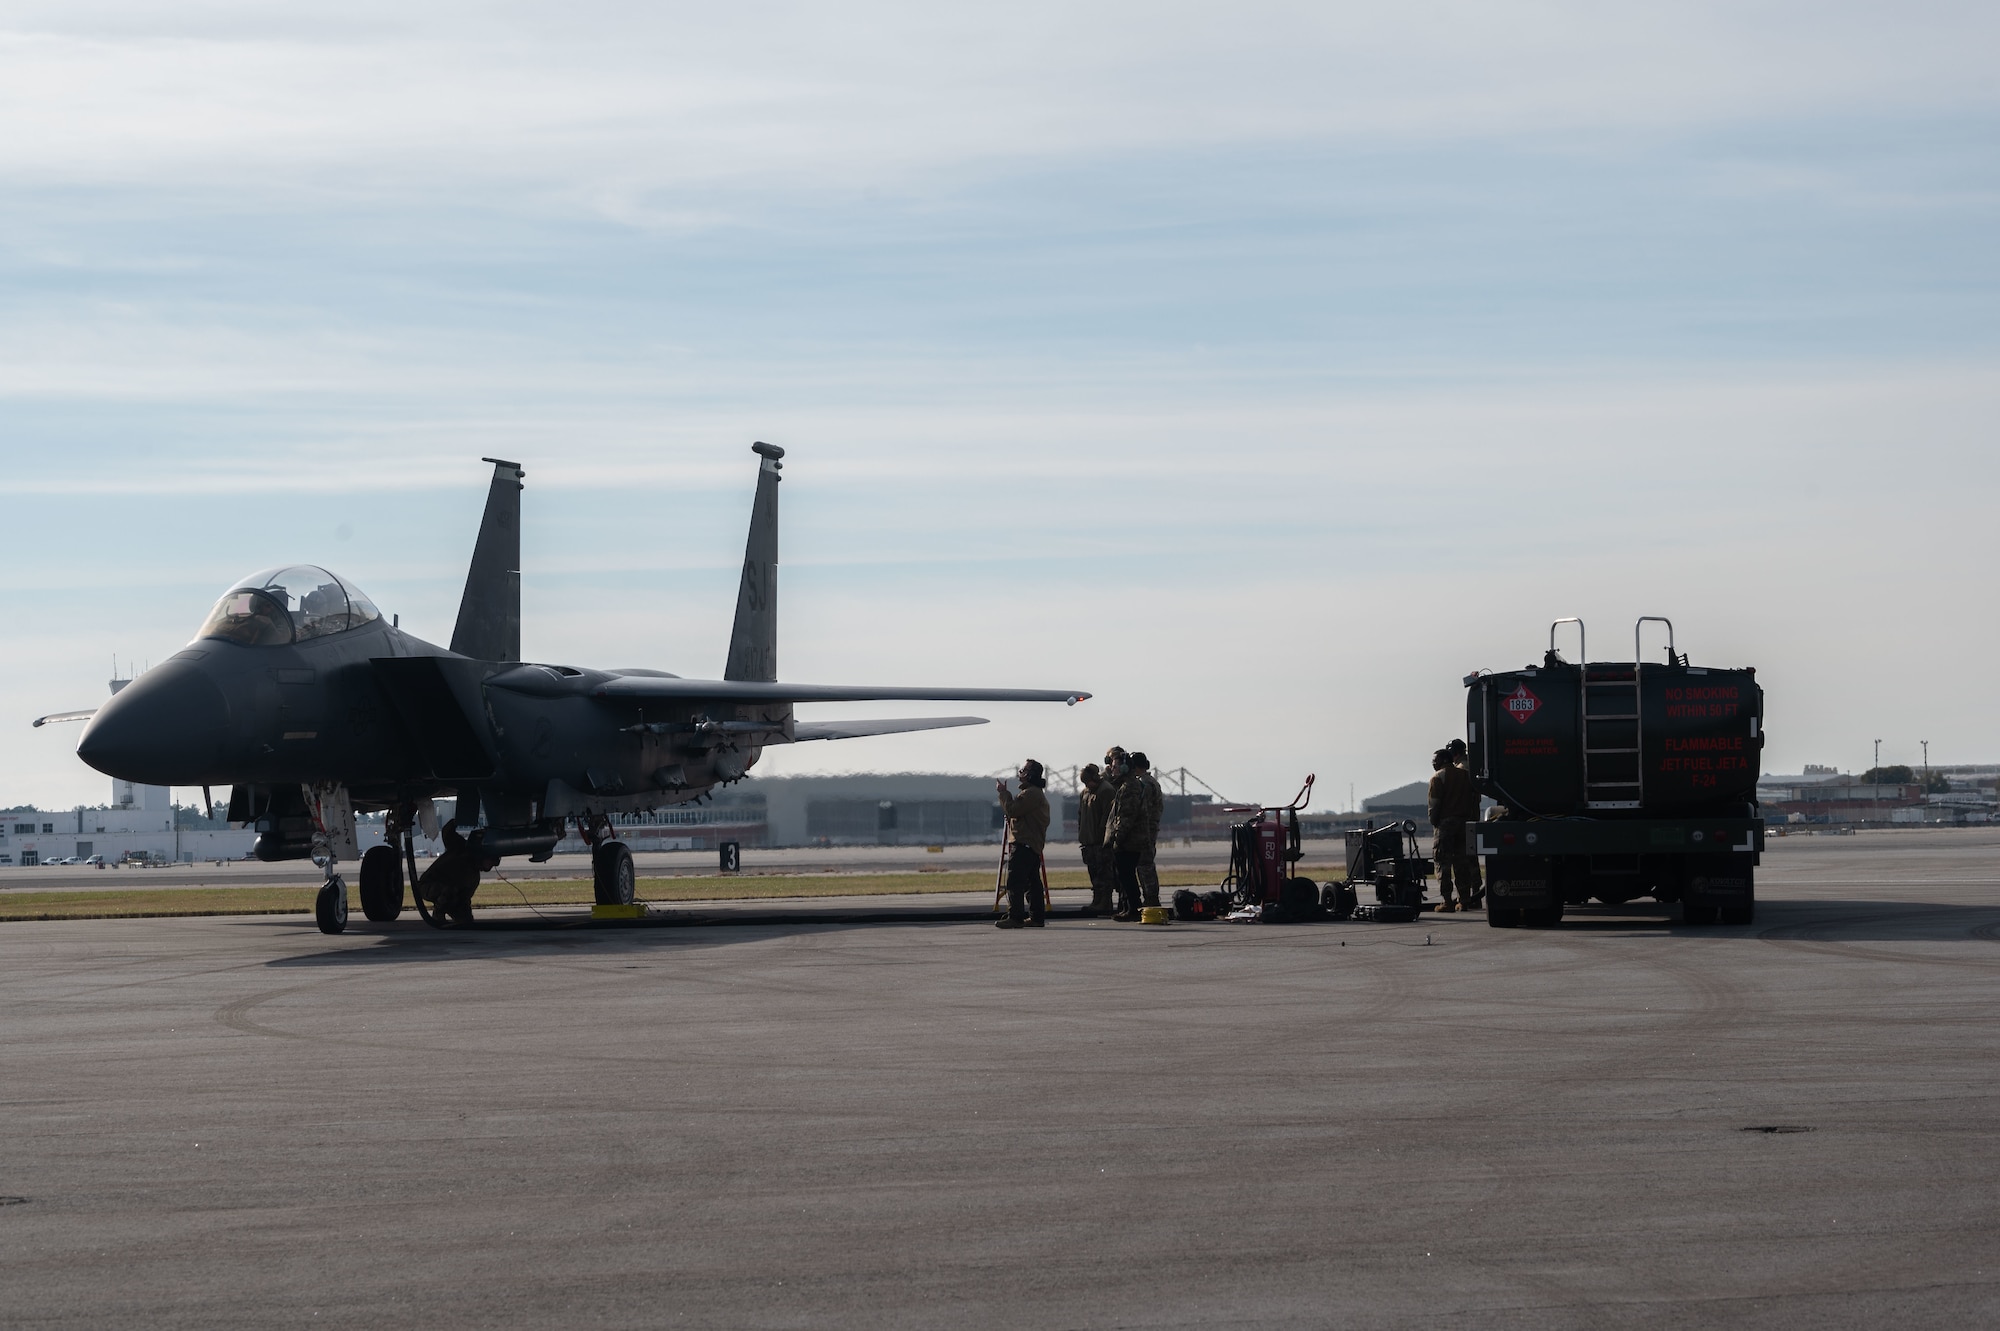 Members of the 4th Fighter Wing, from Seymour Johnson Air Force Base, North Carolina, refuel an F-15E Strike Eagle during Agile Cub 3 at Marine Corps Air Station Cherry Point, N.C., Dec. 14, 2022. Agile Cub 3 demonstrated the 4th Fighter Wing’s ability to rapidly deploy and establish operating bases. (U.S. Air Force photo by Airman 1st Class Rebecca Sirimarco-Lang)